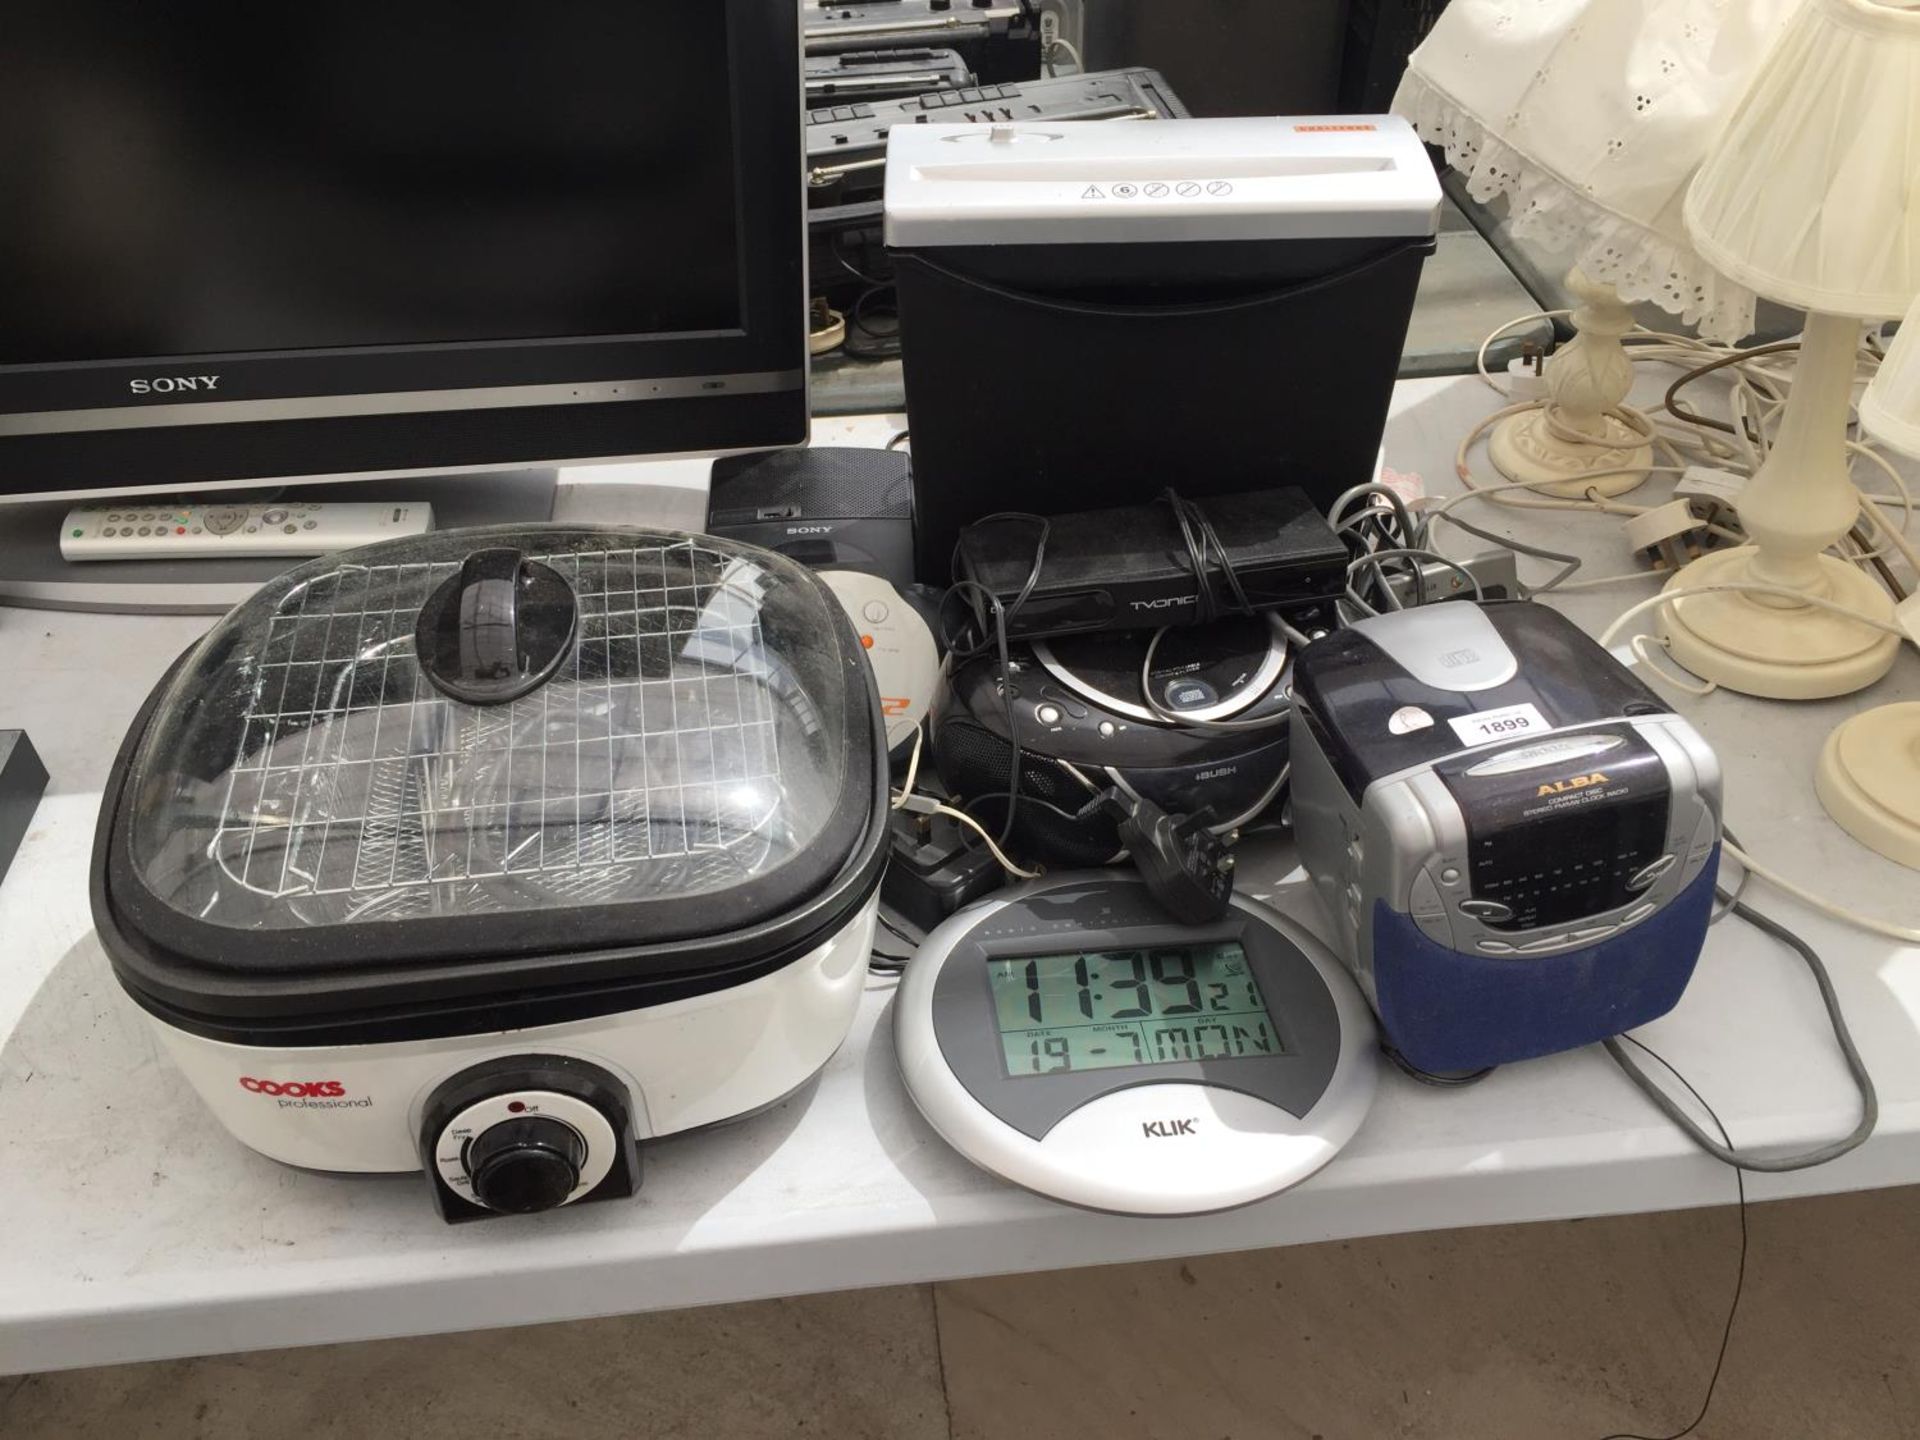 AN ASSORTMENT OF ELECTRICALS TO INCLUDE A PAPER SHREDDERWALKMAN AND DEEP FAT FRYER ETC